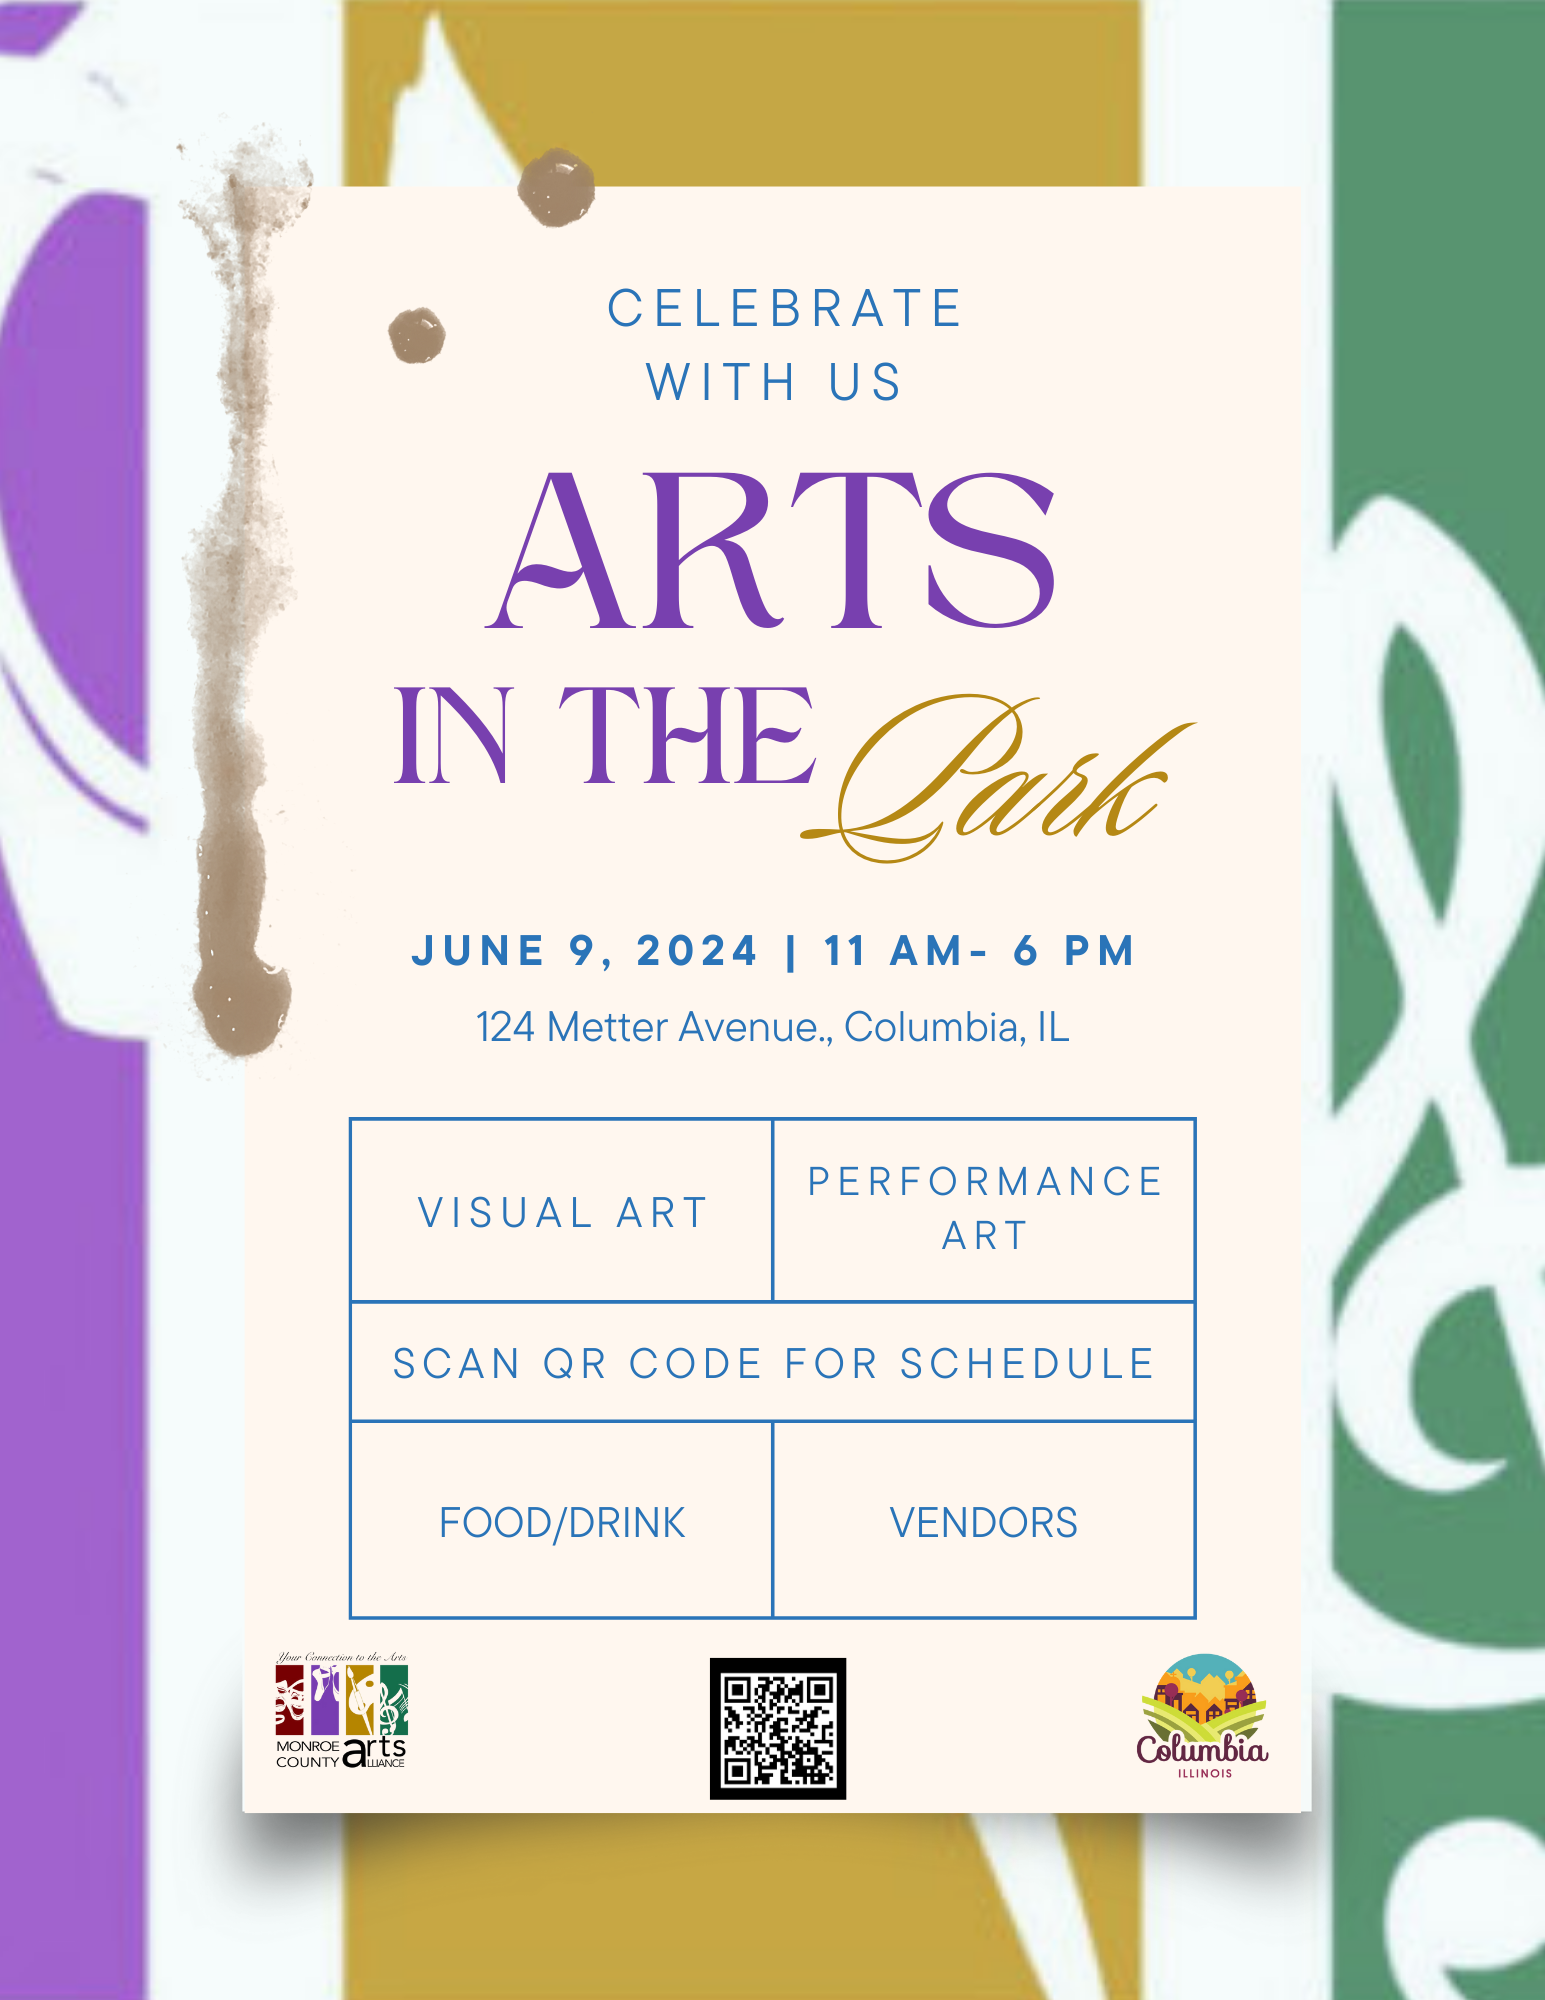 Arts in the Park